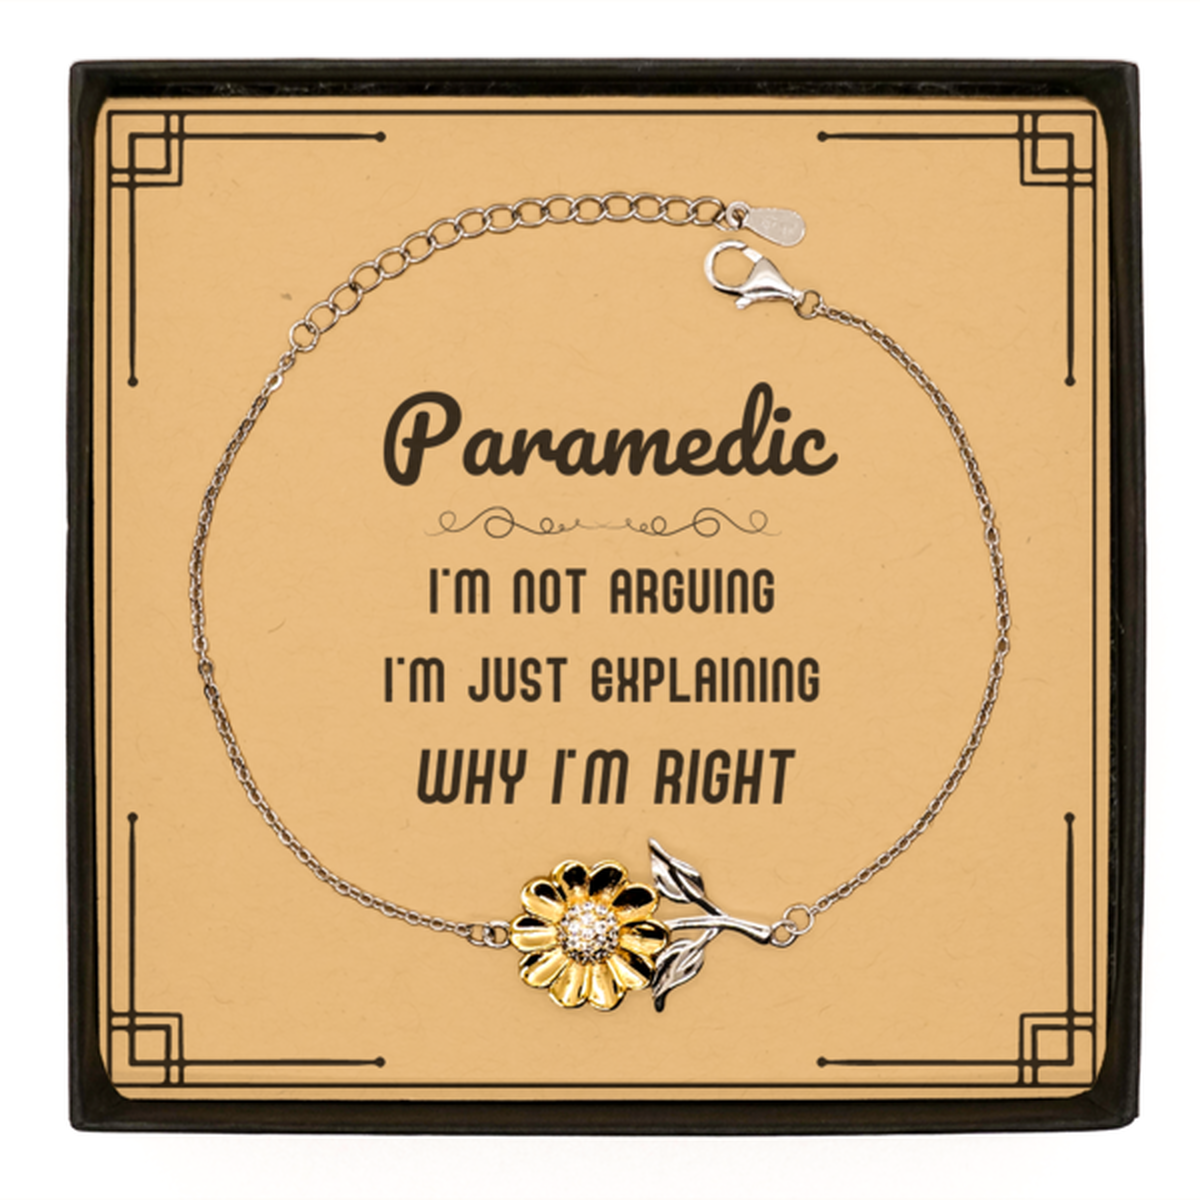 Paramedic I'm not Arguing. I'm Just Explaining Why I'm RIGHT Sunflower Bracelet, Funny Saying Quote Paramedic Gifts For Paramedic Message Card Graduation Birthday Christmas Gifts for Men Women Coworker